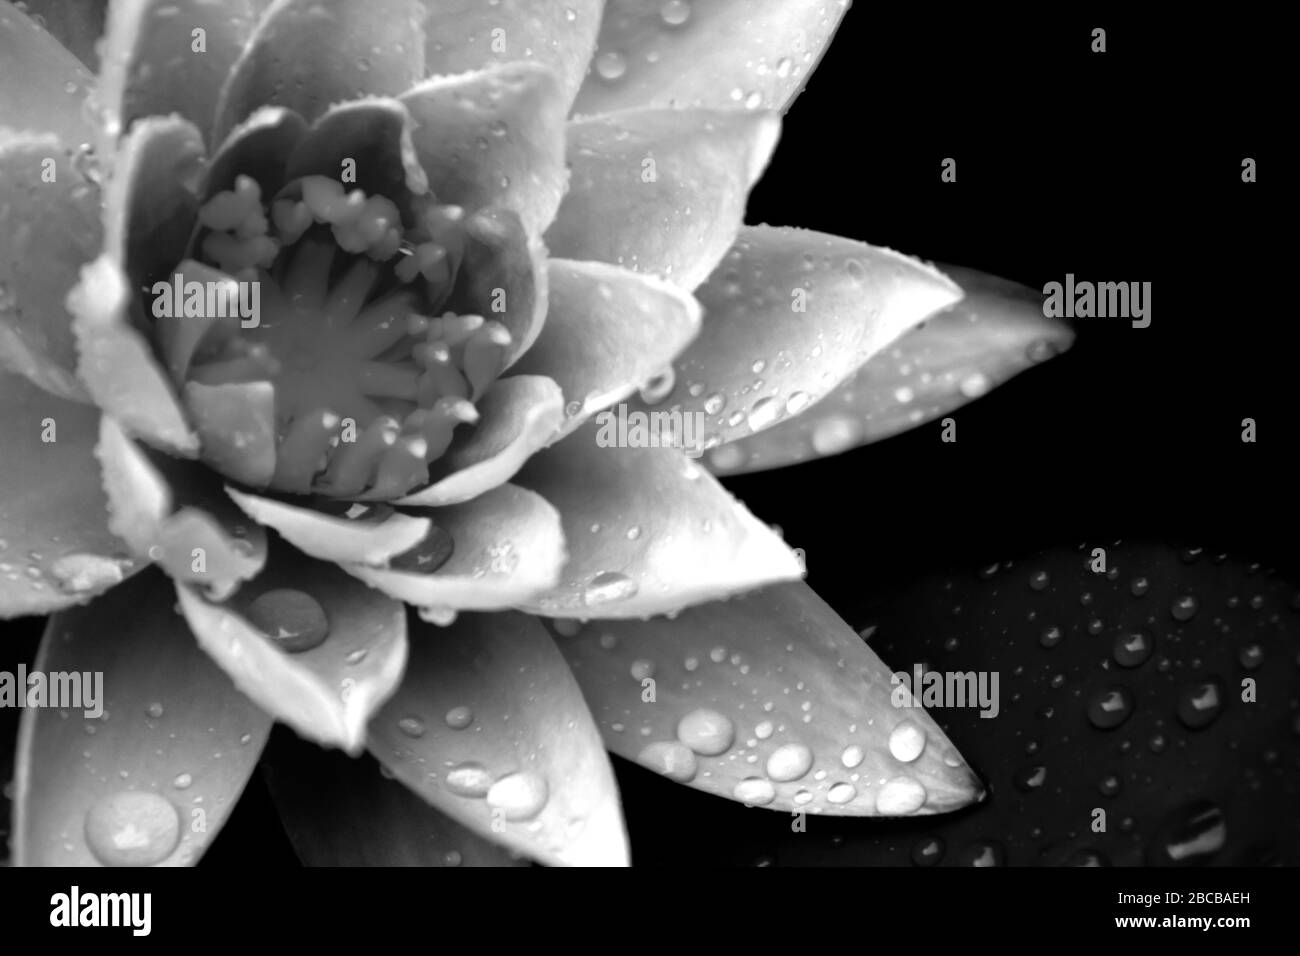 A Monochrome photo of a waterlily, Nymphaea, covered in water droplets Stock Photo